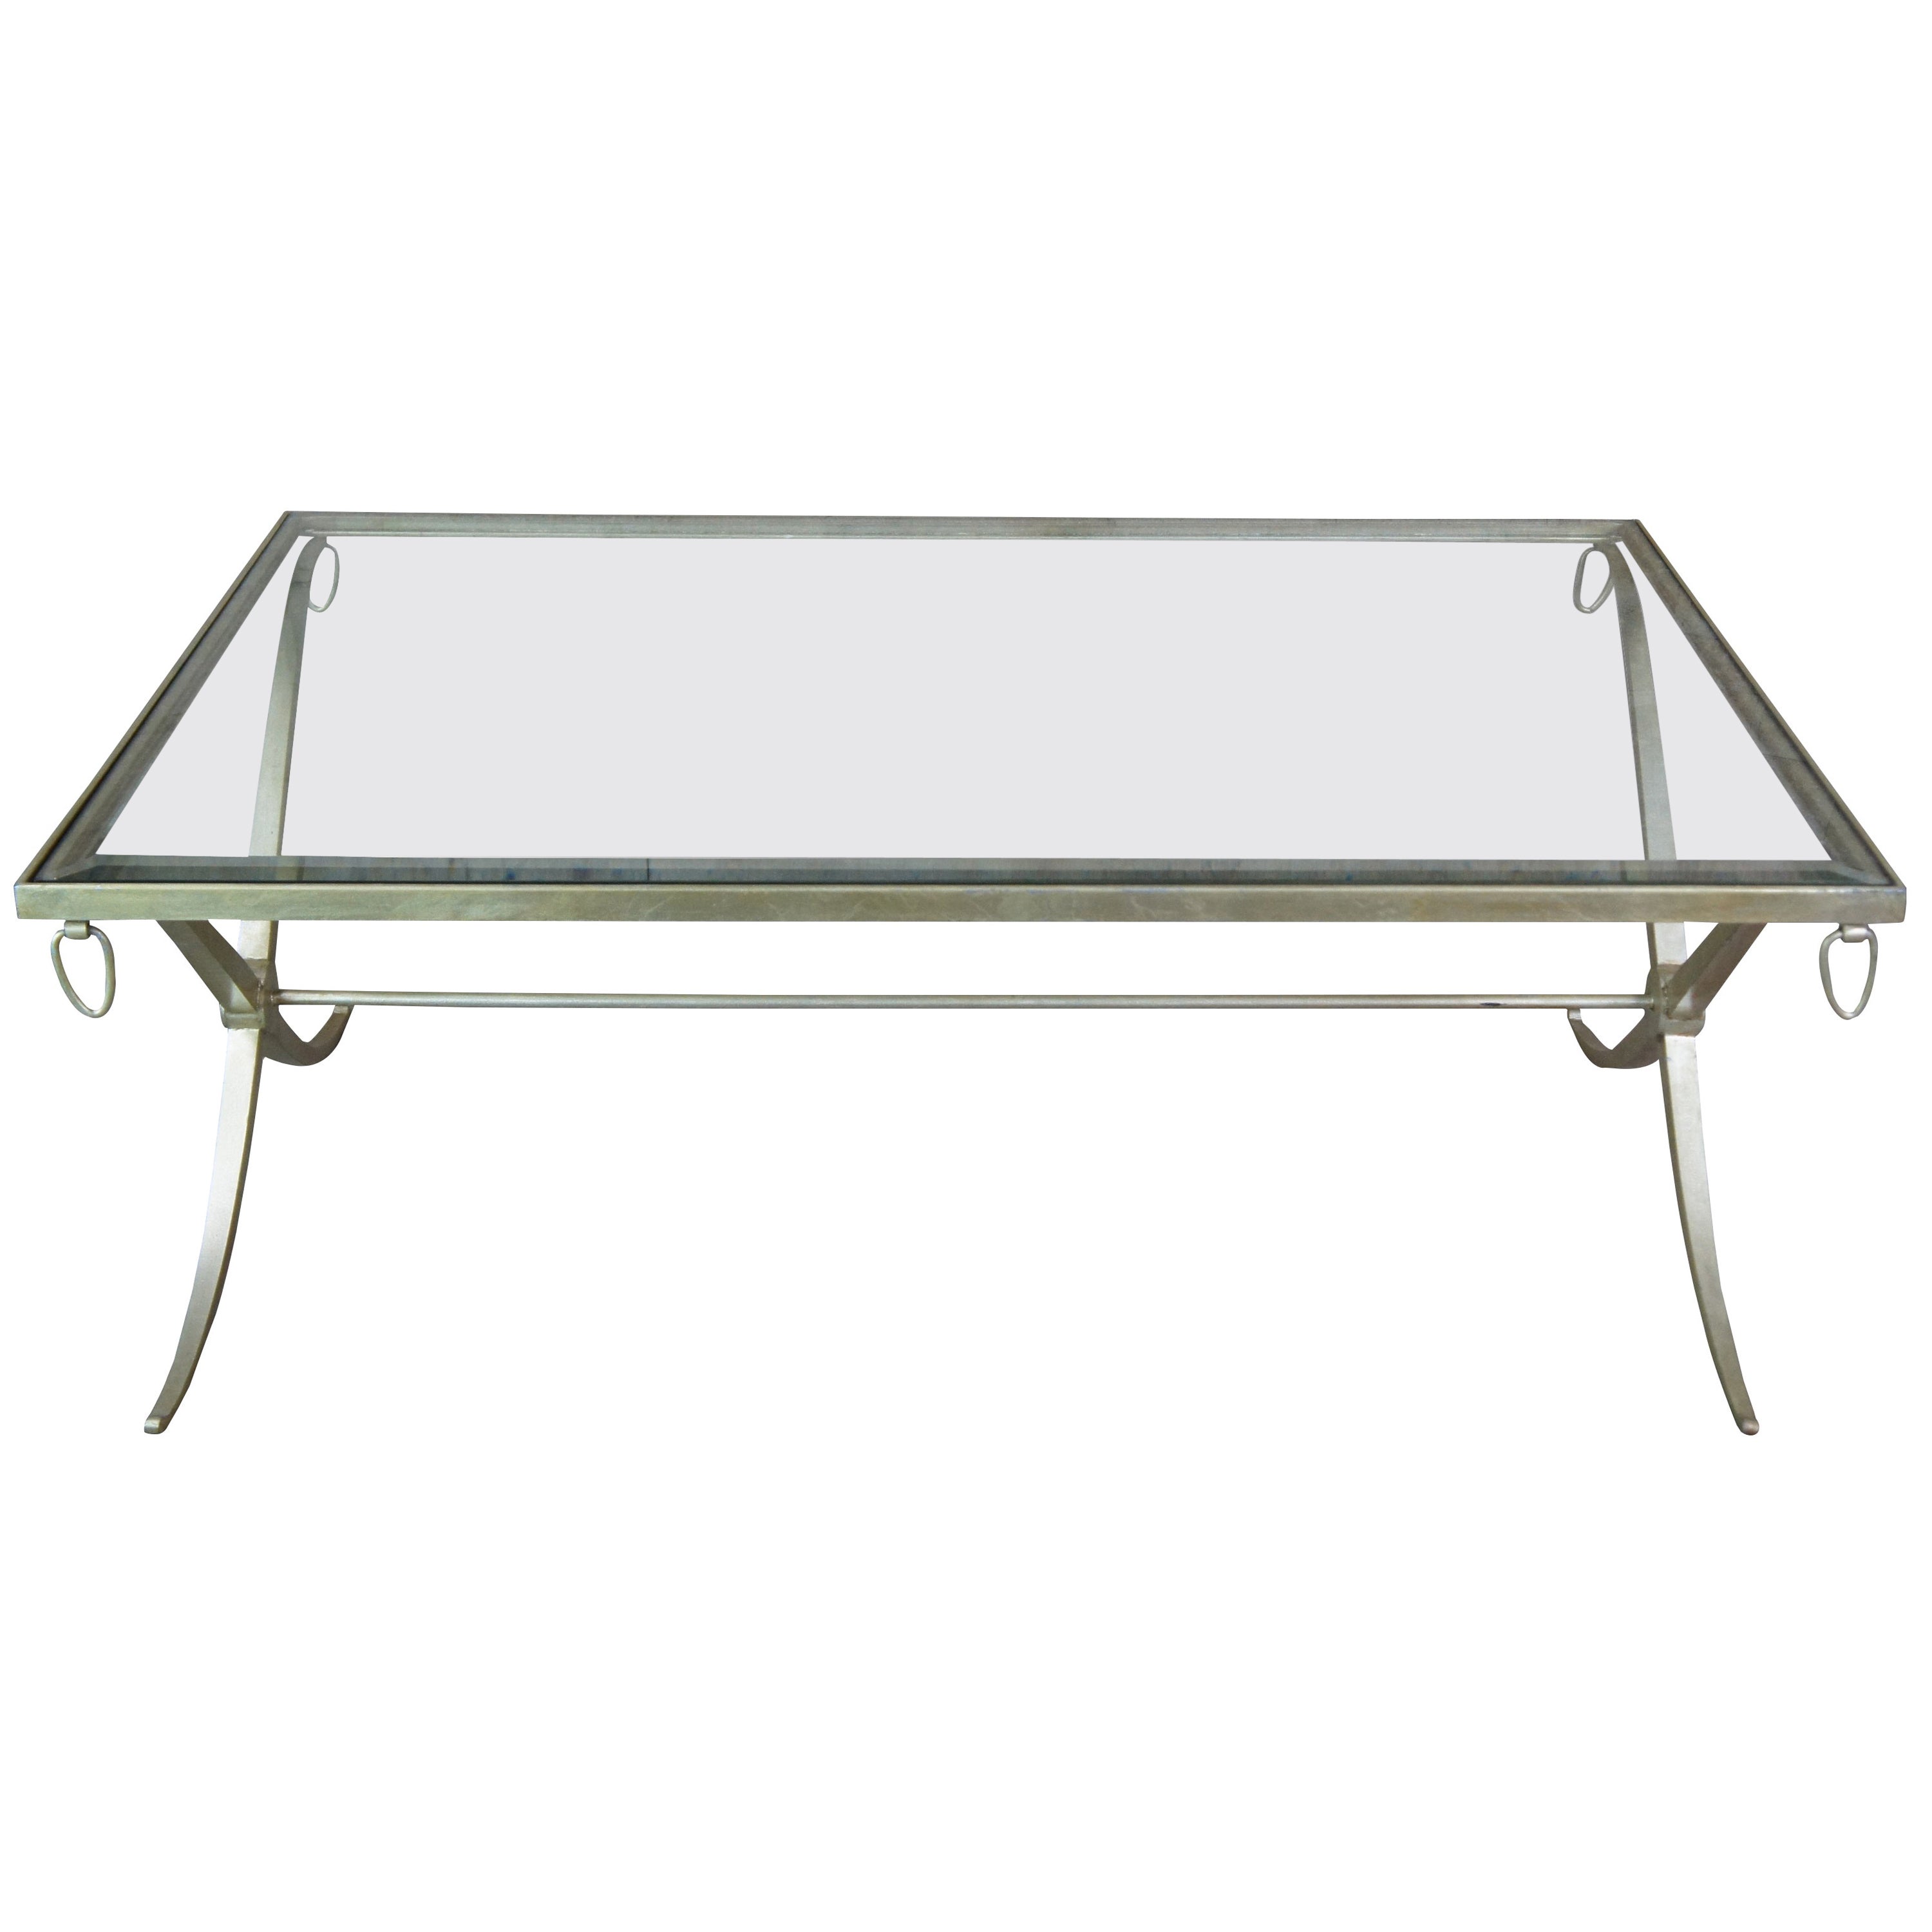 Barbara Barry for Baker Furniture iron and glass coffee table featuring rectangular form supported by an iron frame with hanging rings at each corner of the apron, x-form legs, and a round stretcher support.  Champagne color finish.
 